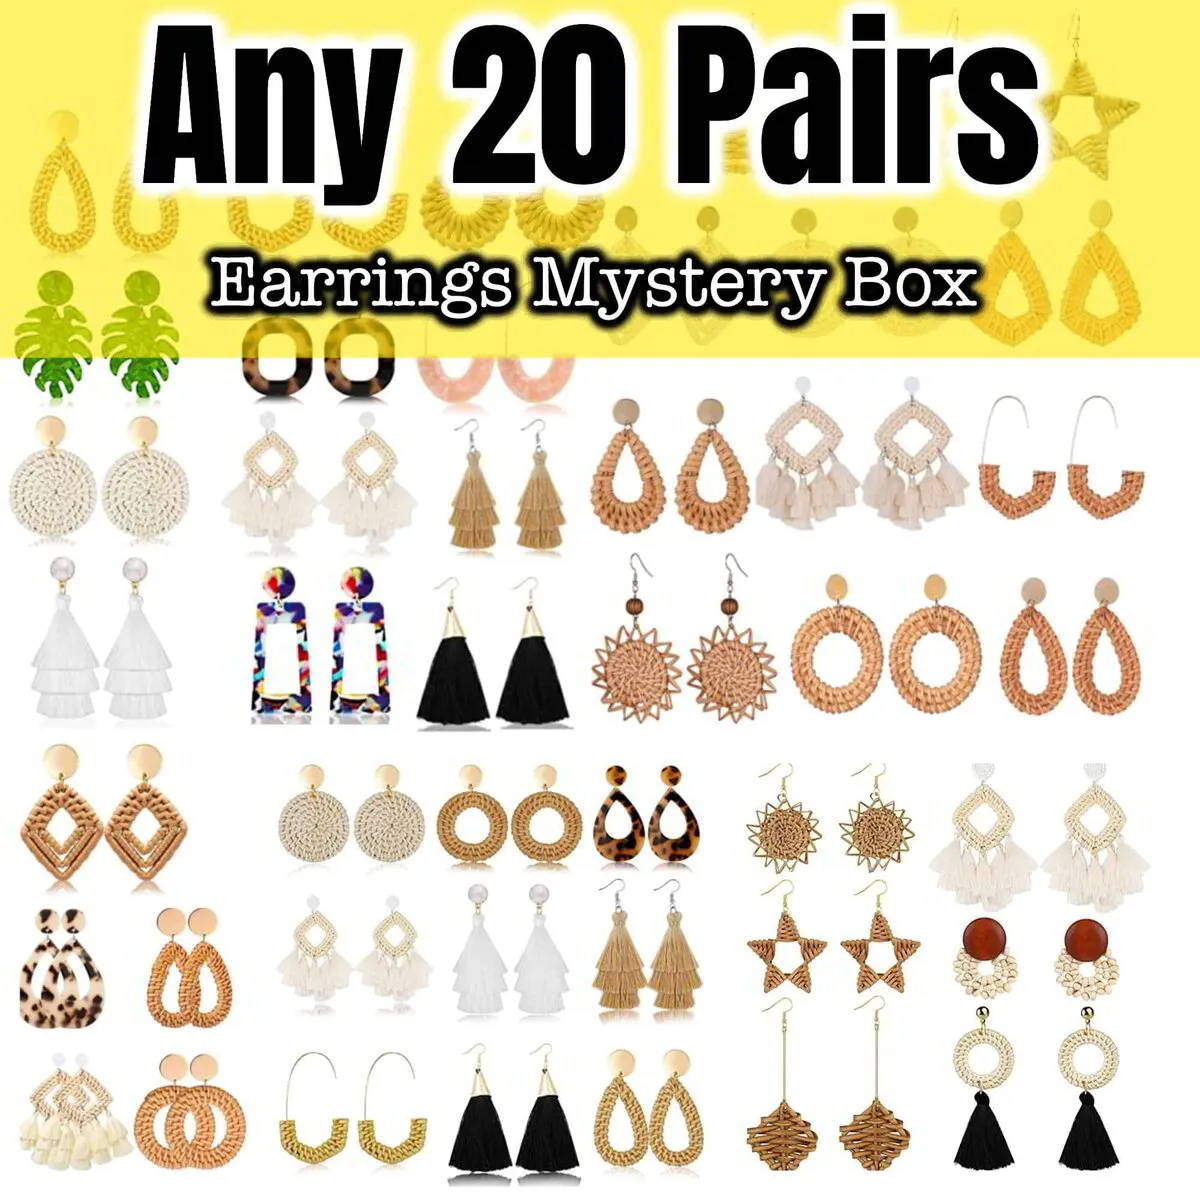 Handwoven Earrings Mystery Box - 20 Pairs Assorted Fashion Jewelry